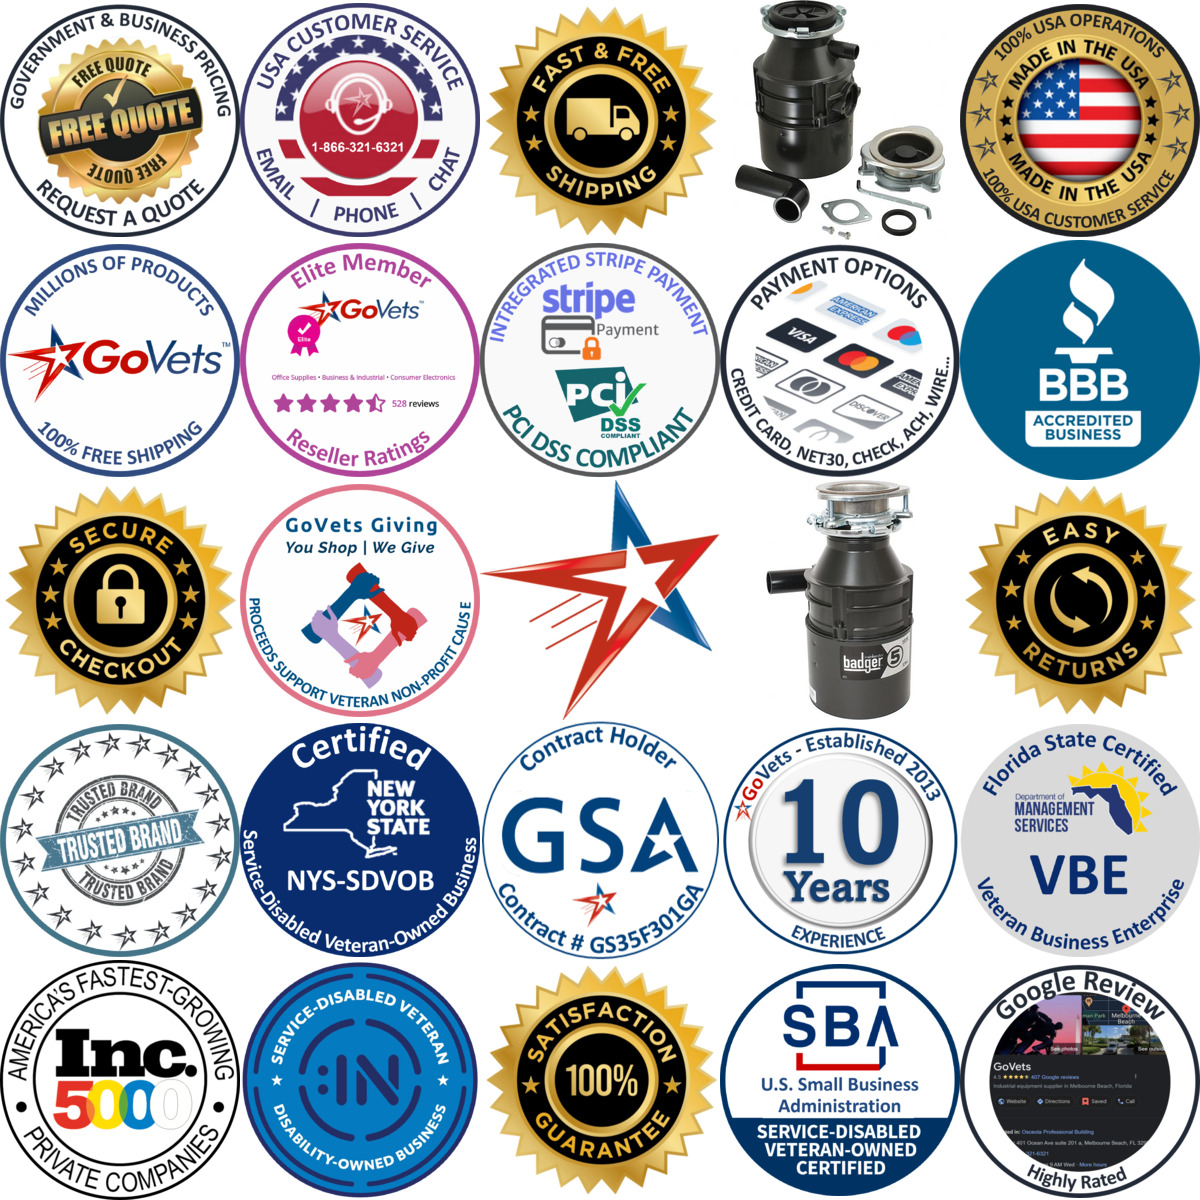 A selection of Garbage Disposals products on GoVets